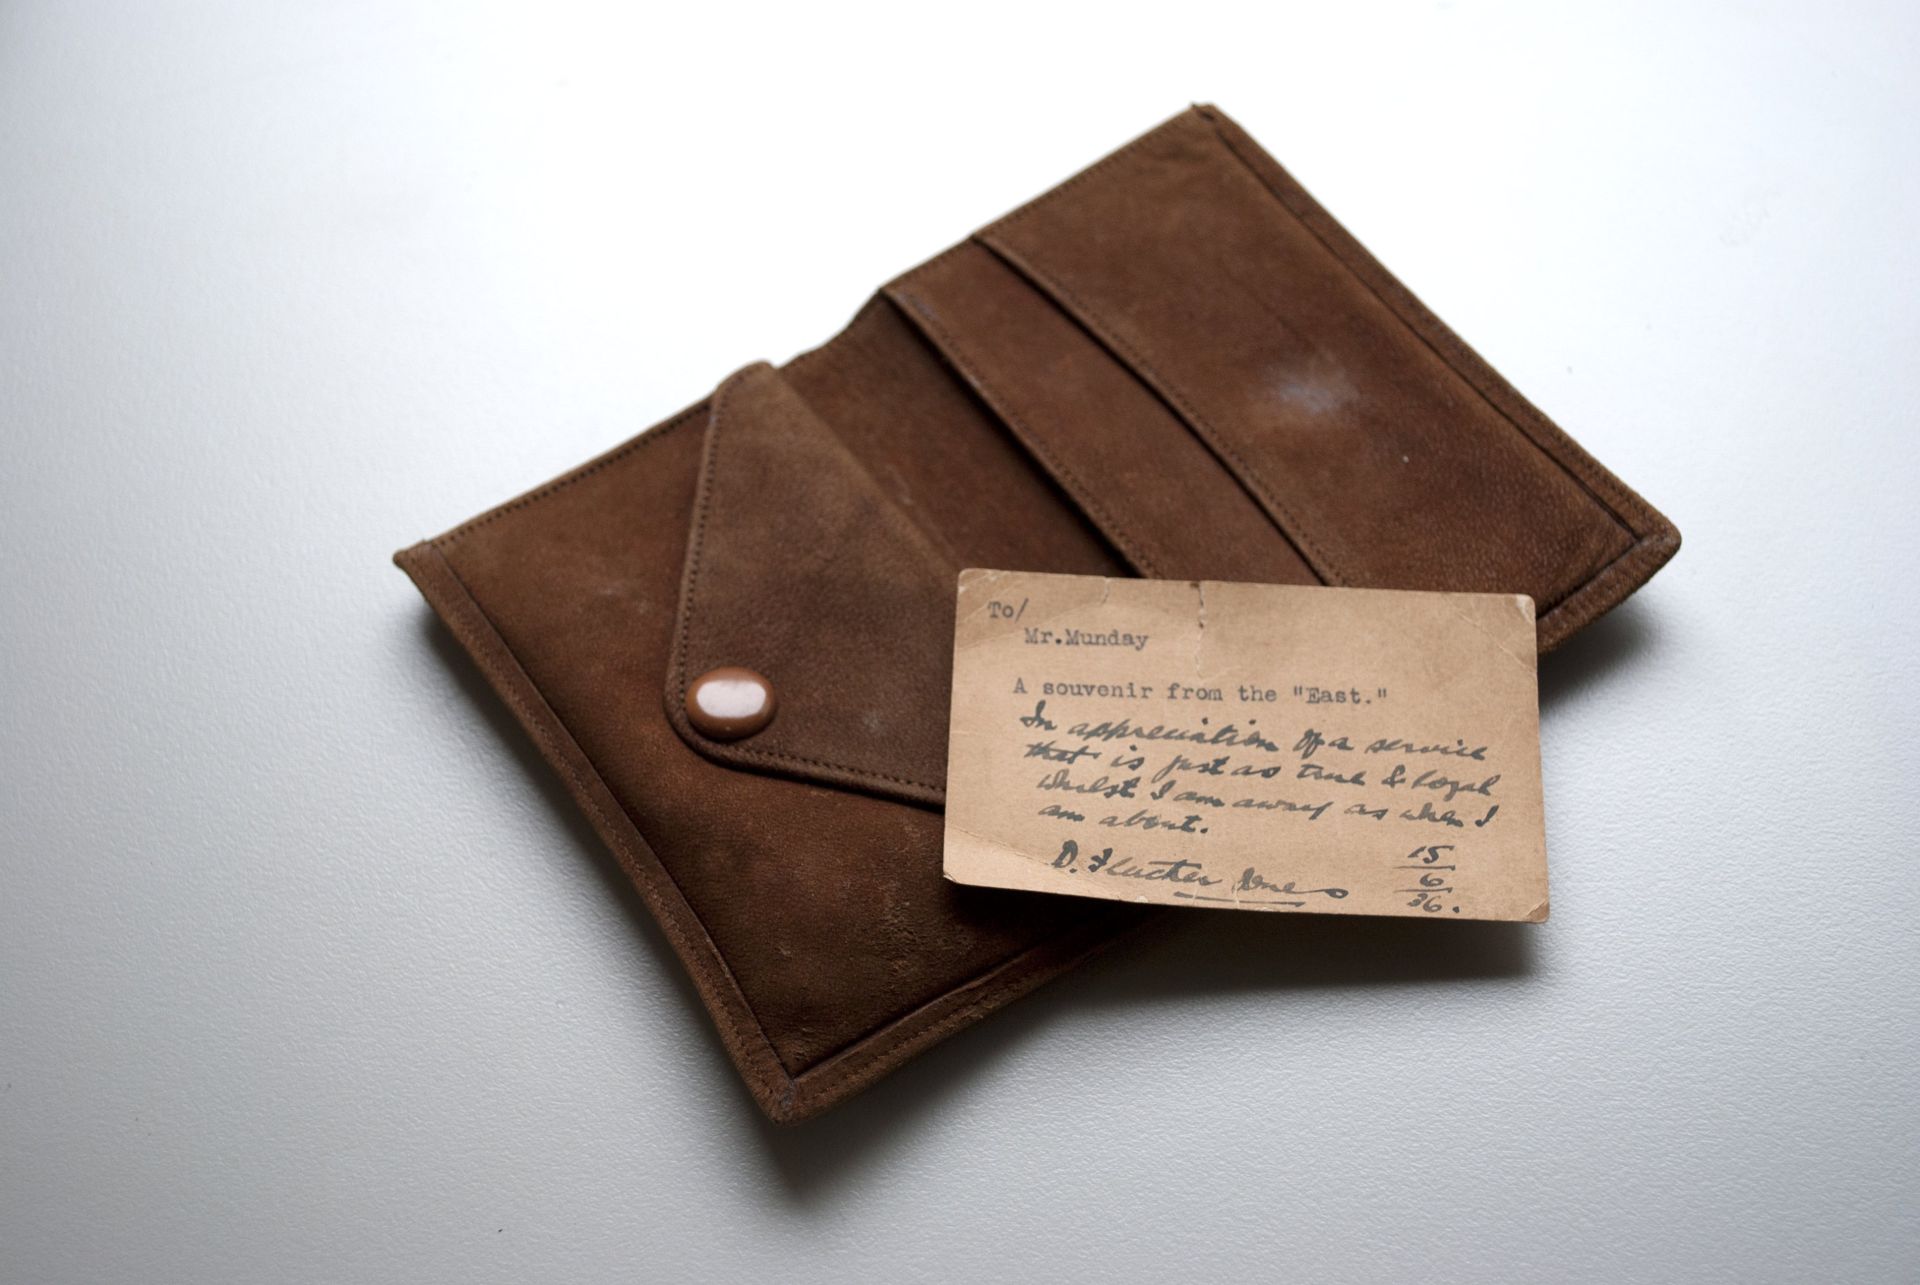 Souvenir Wallet with note from FJ to tailor Lance Munday.  FJ bought the gift back from his trip to Japan to study worker's cooperatives in 1936.  Shared by Lance's granddaughter, Michelle Cust nee Munday